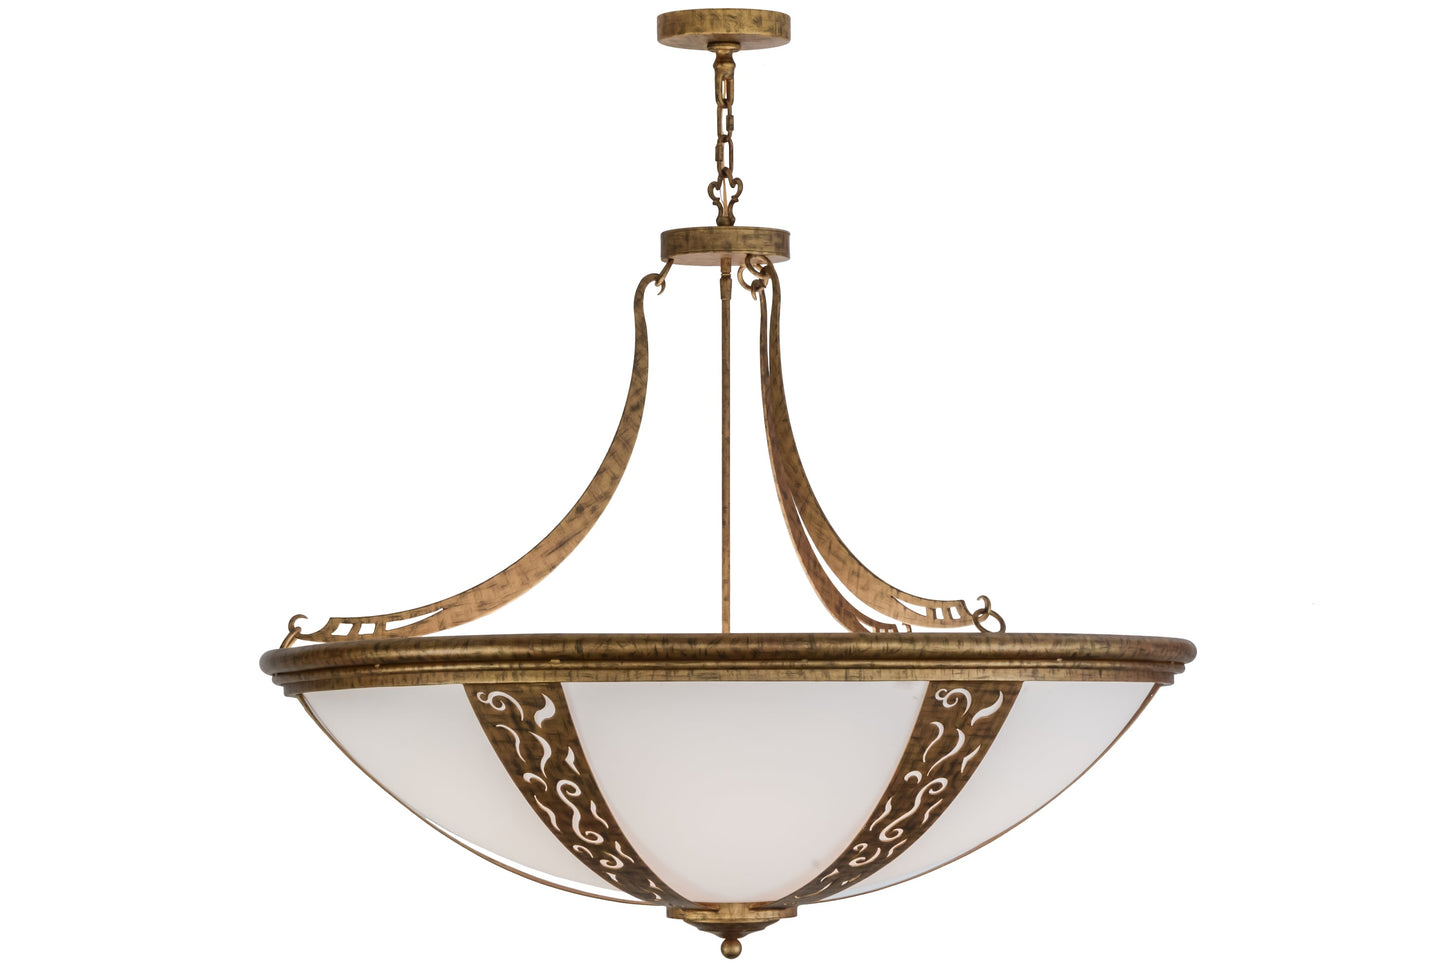 42" Grayson Inverted Pendant by 2nd Ave Lighting